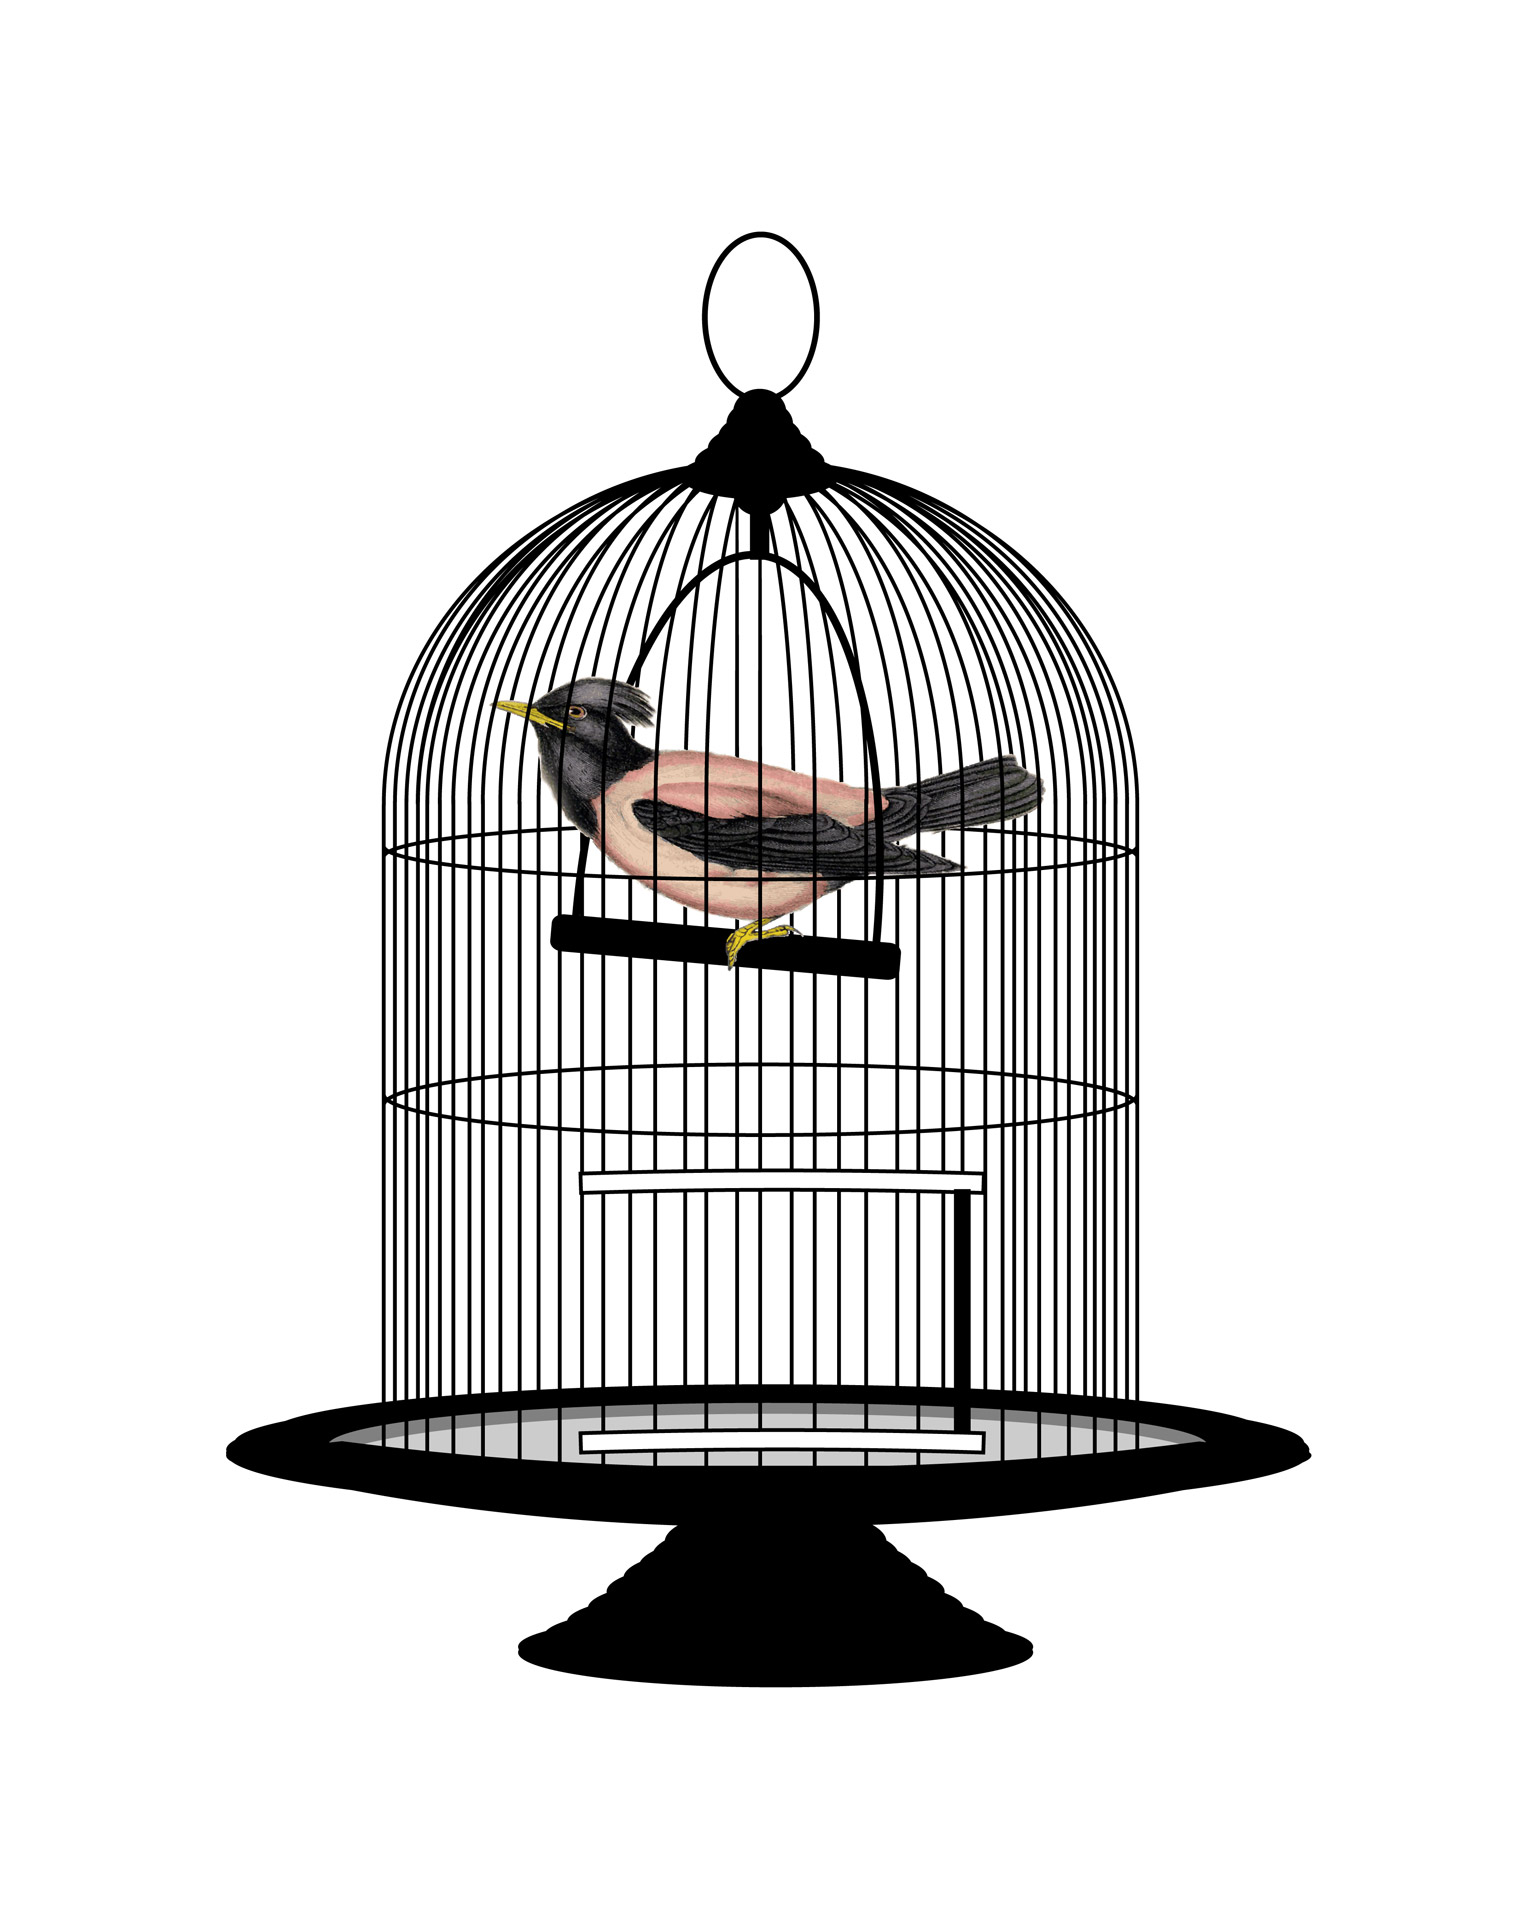 Birdcage clipart #6, Download drawings